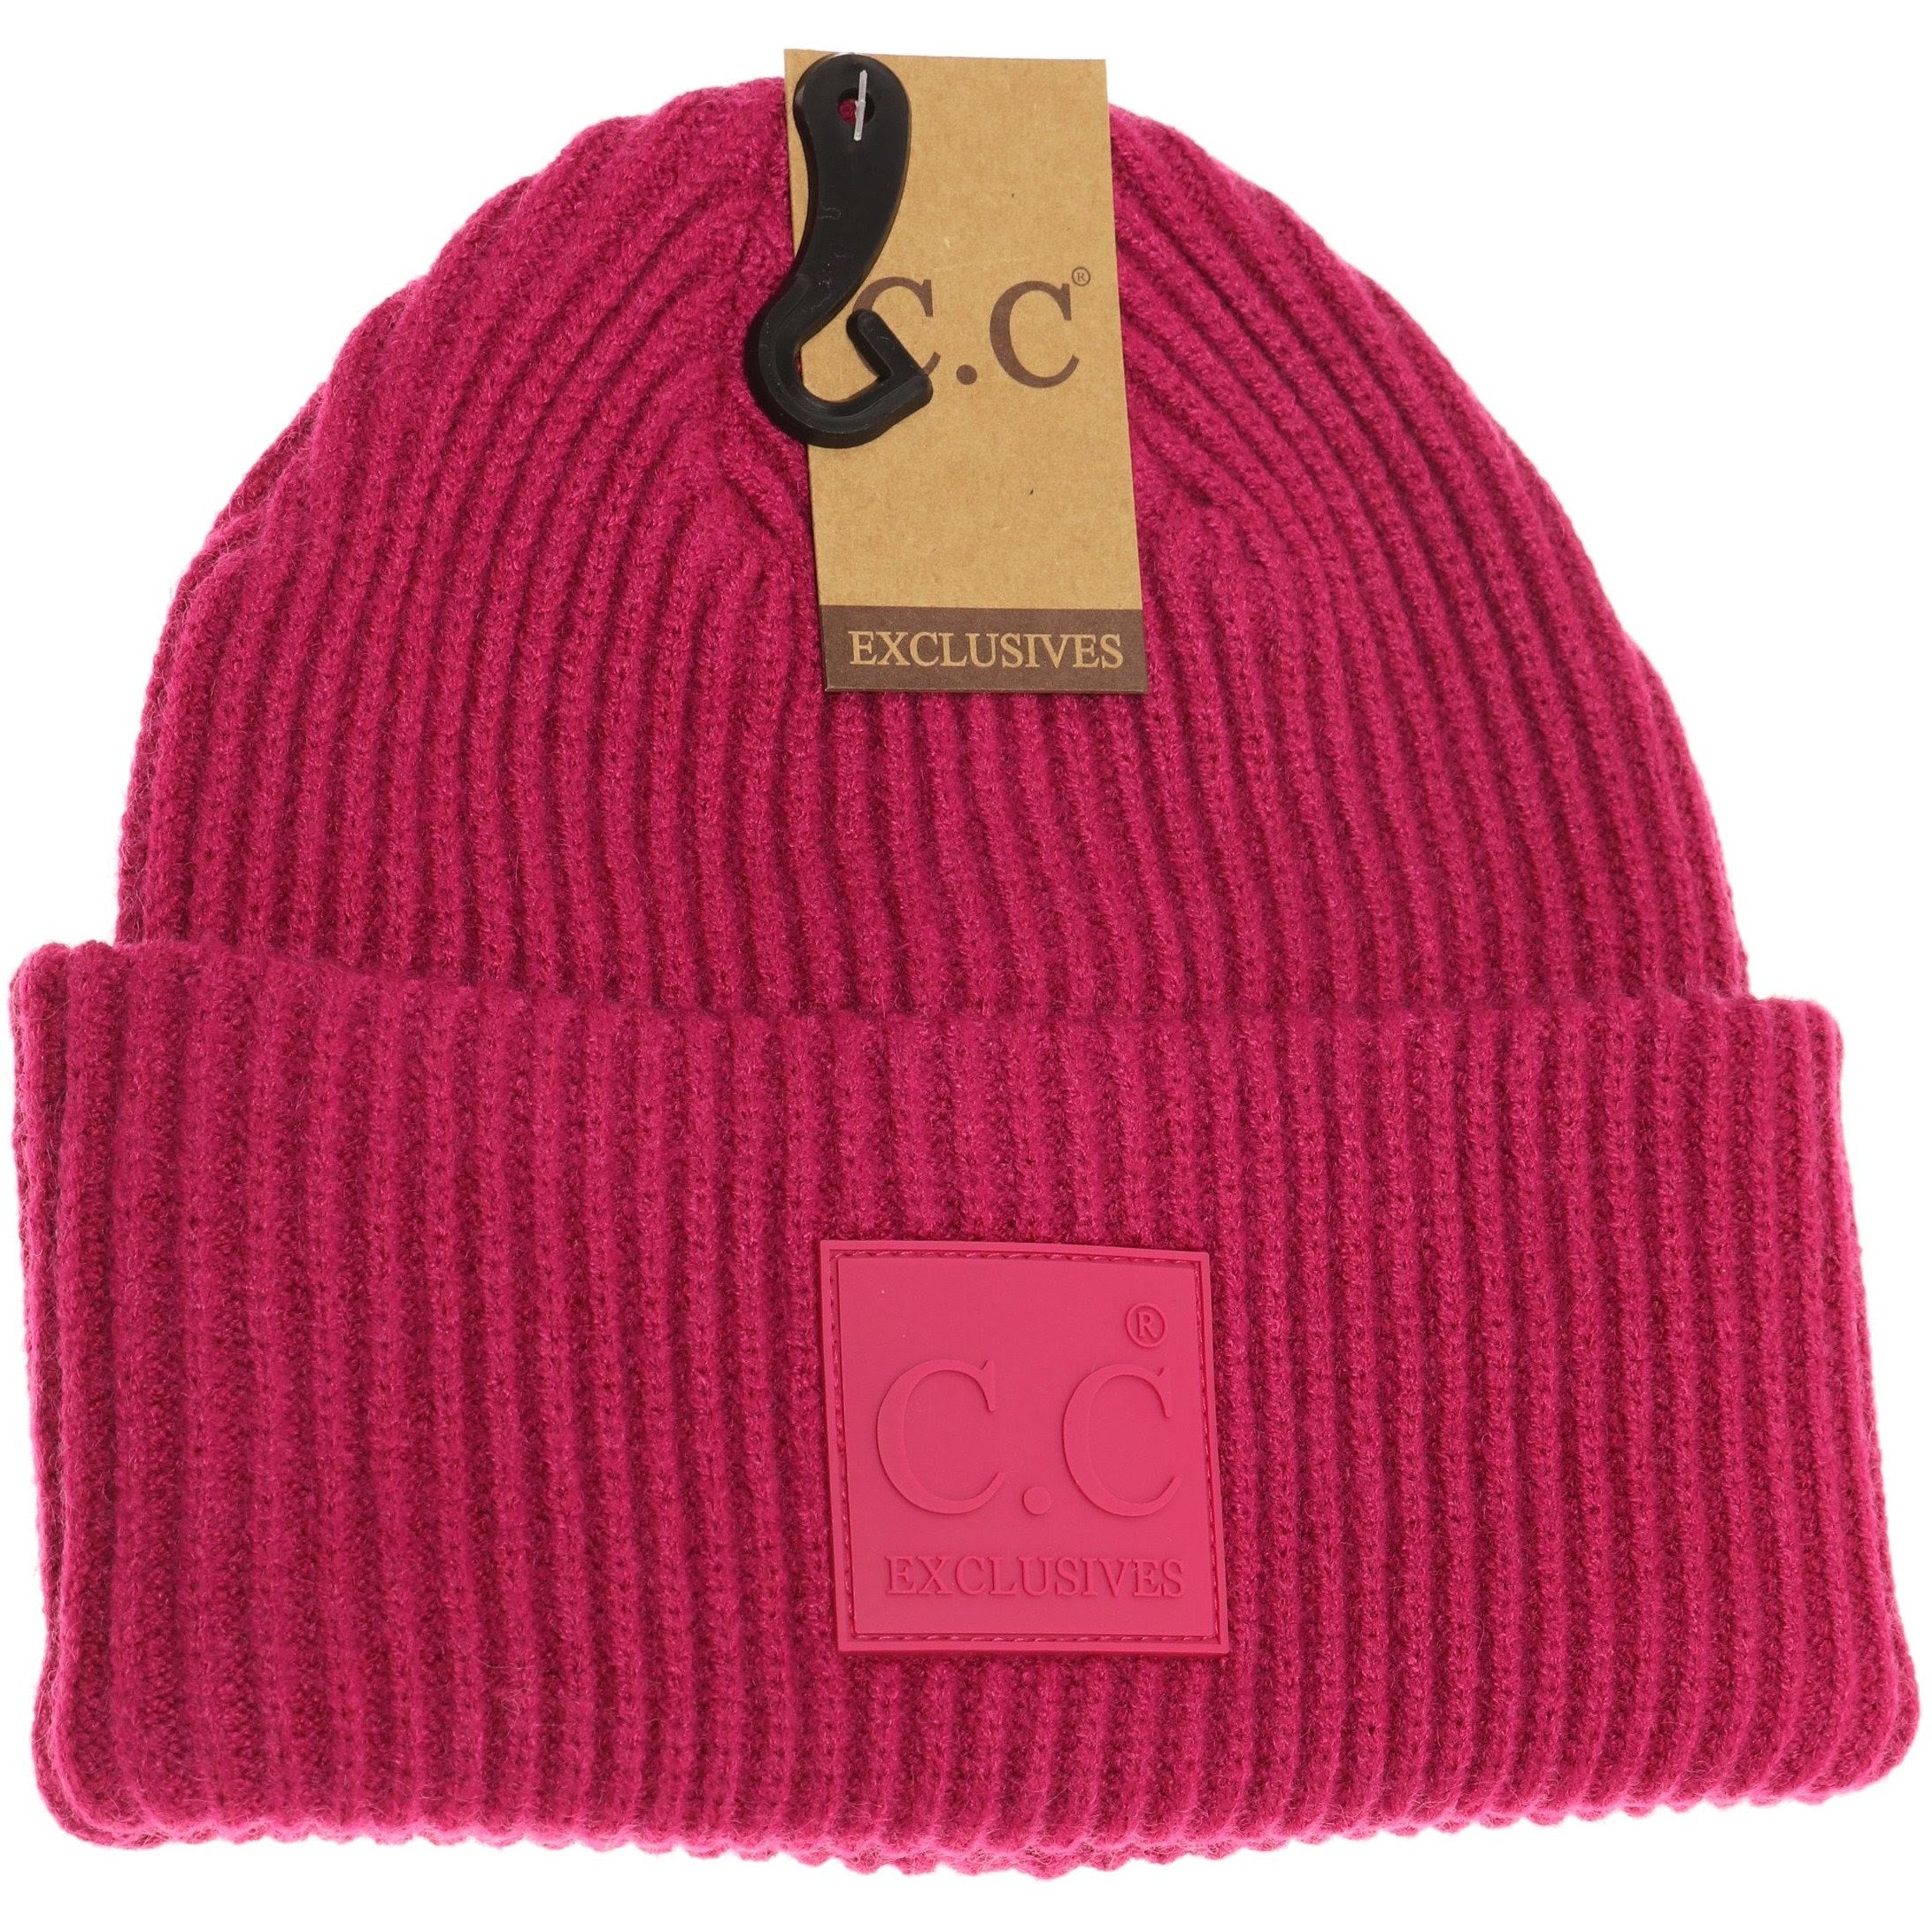 Solid Ribbed CC Beanie with Rubber Patch - Hot Pink